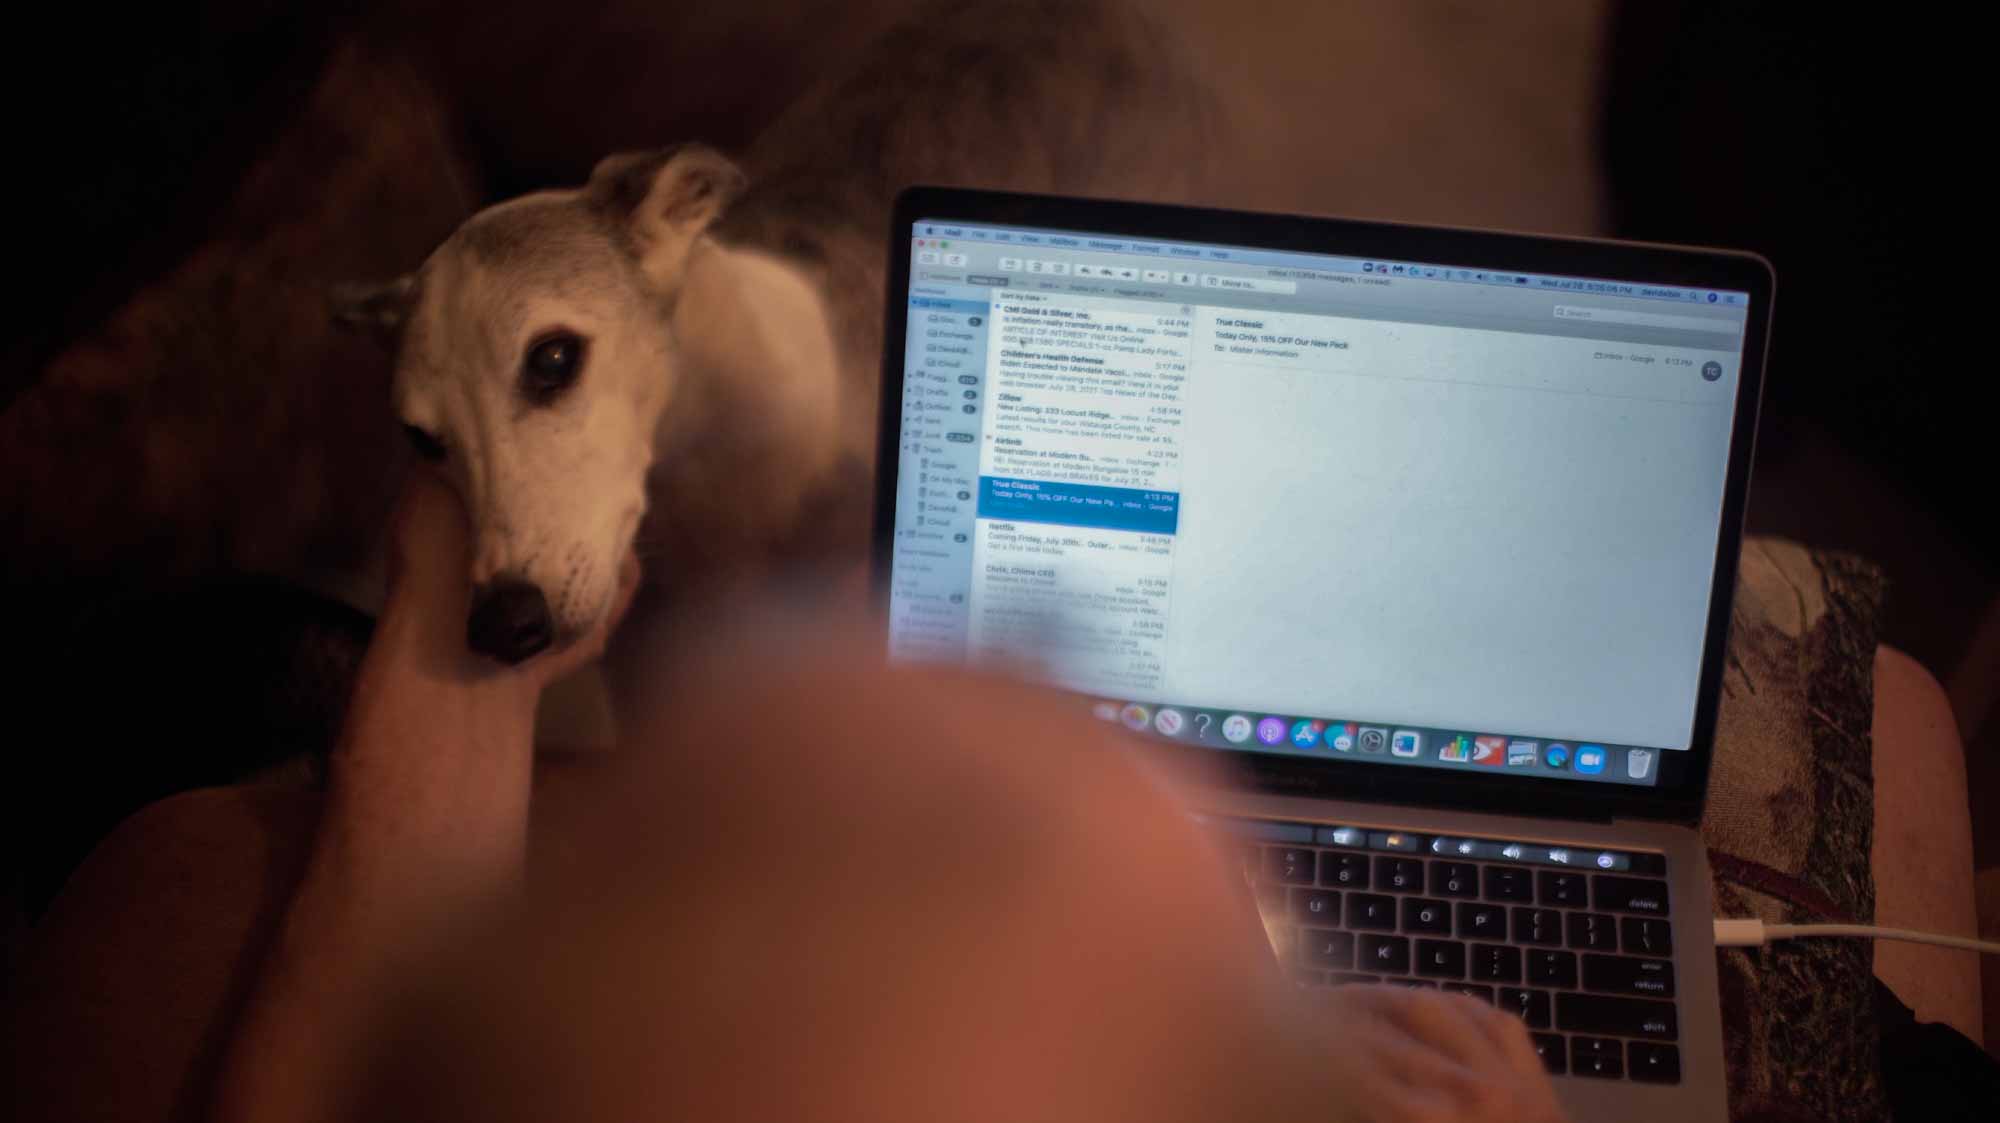 Greyhound rests his head on owner's hand, who is on the computer